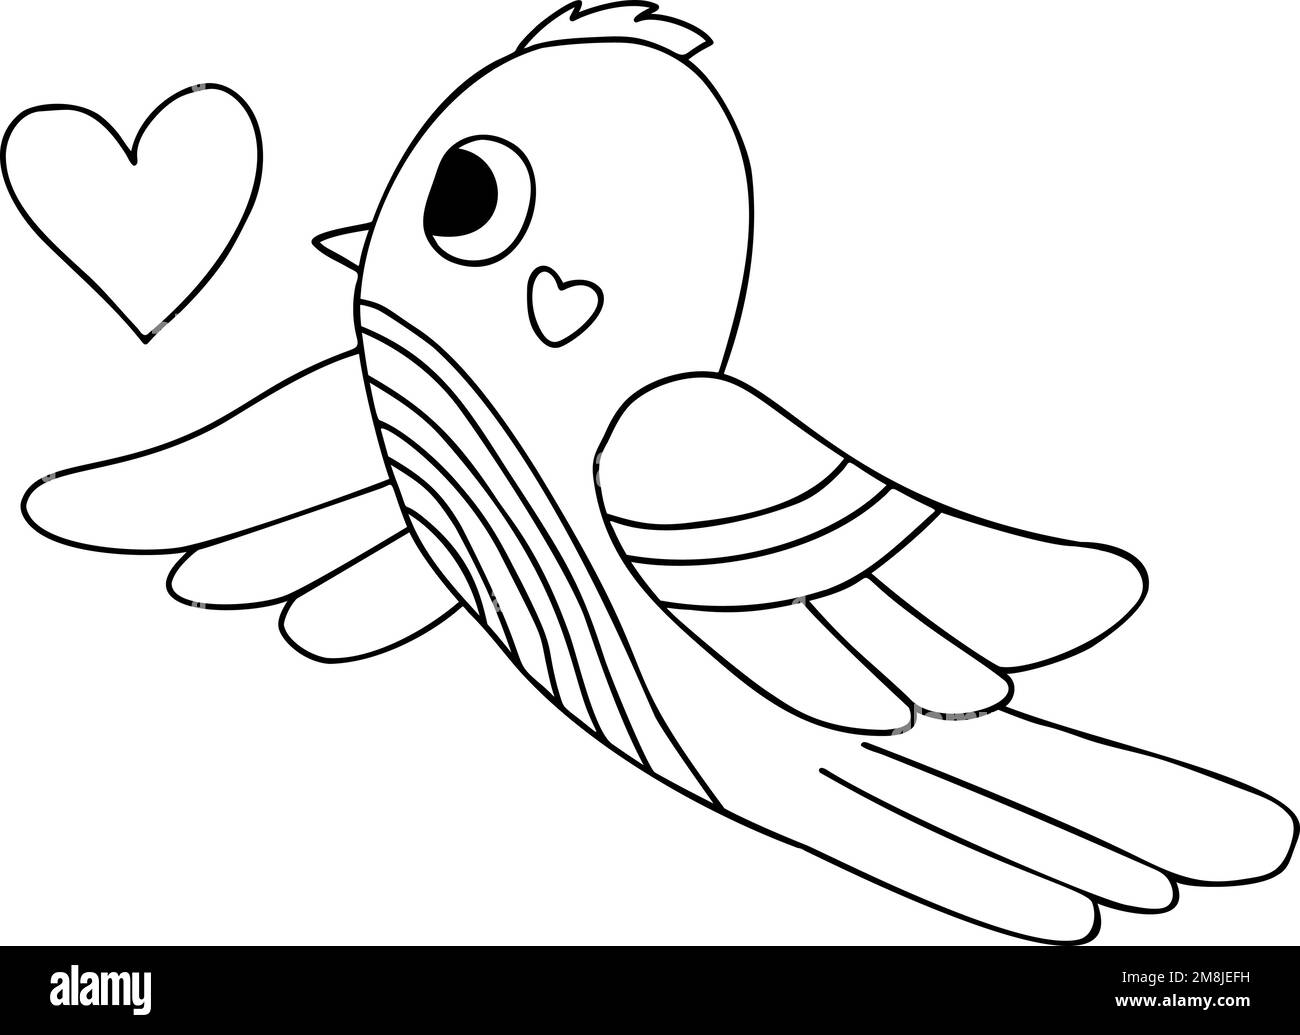 Cute bird with heart vector illustration outline drawing for design decor valentines cards print coloring page stock vector image art